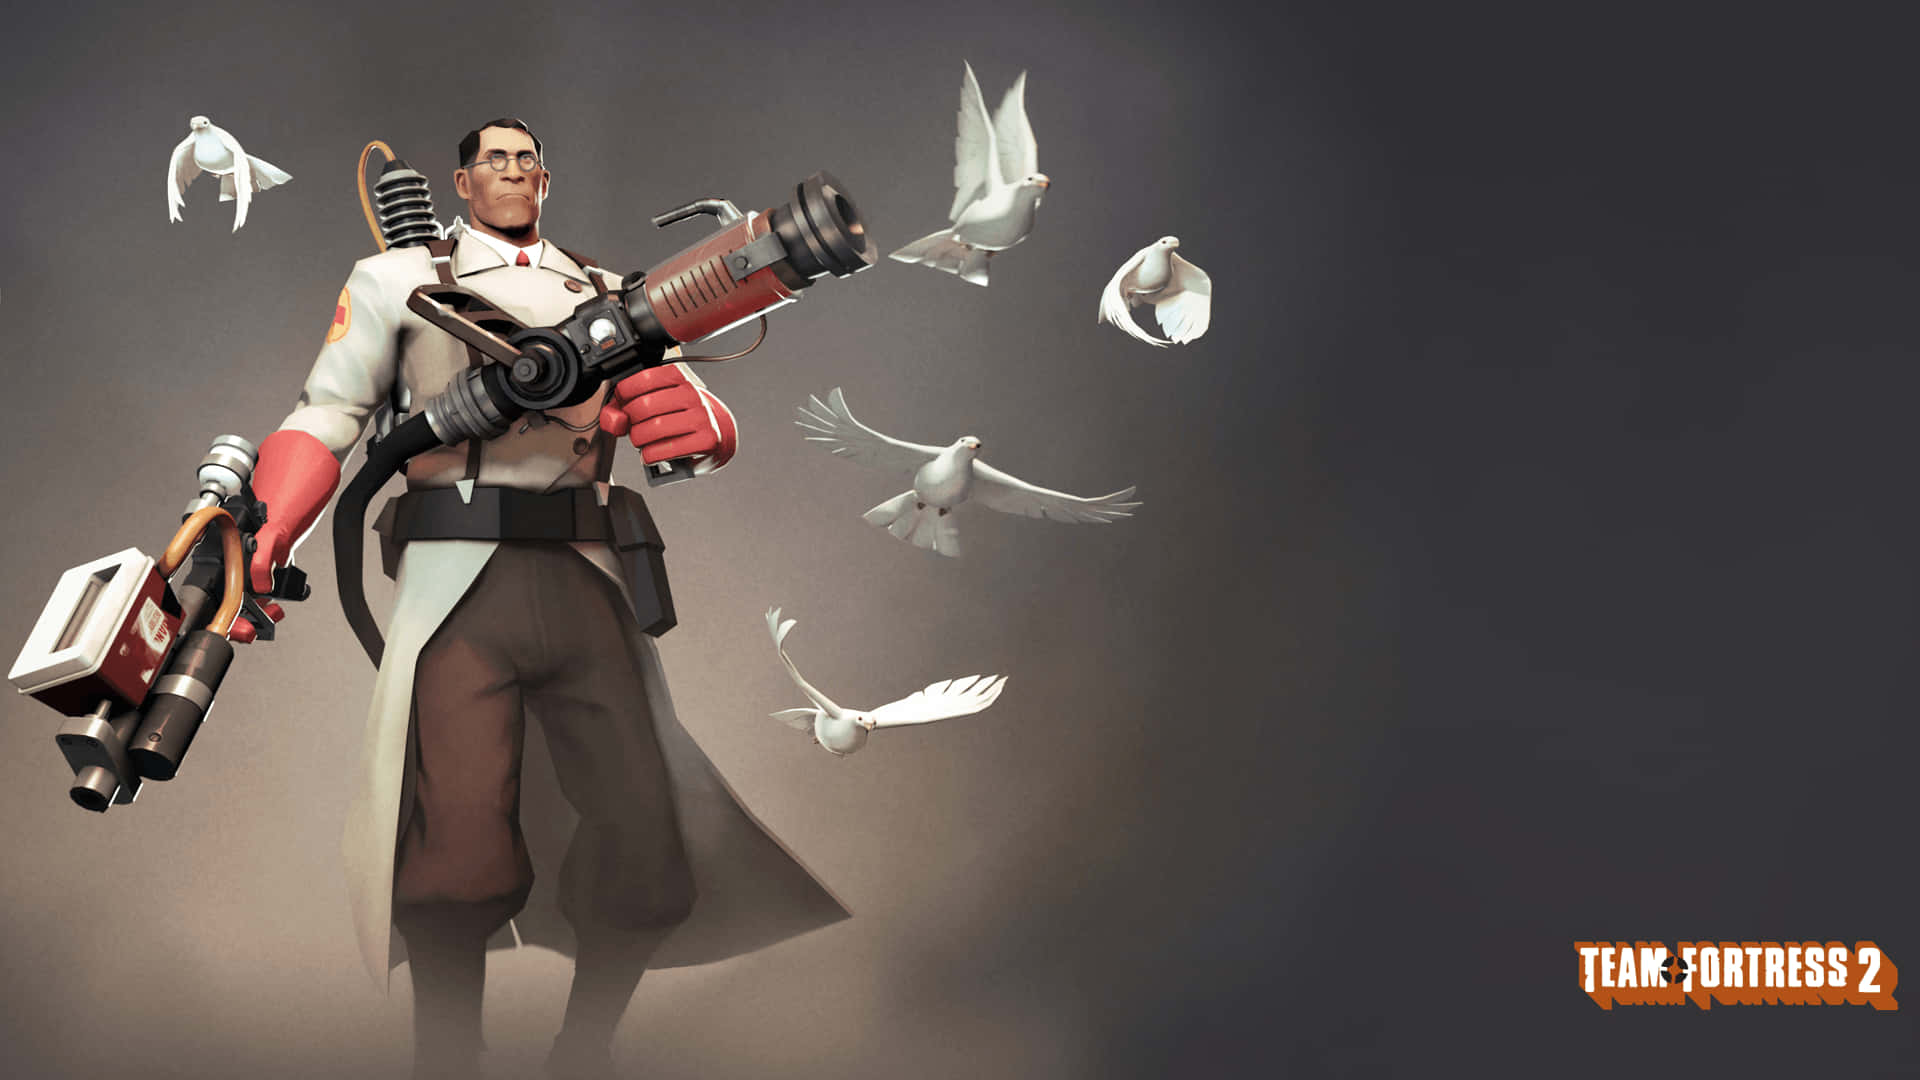 Team Fortress 2 gaming characters ready to battle